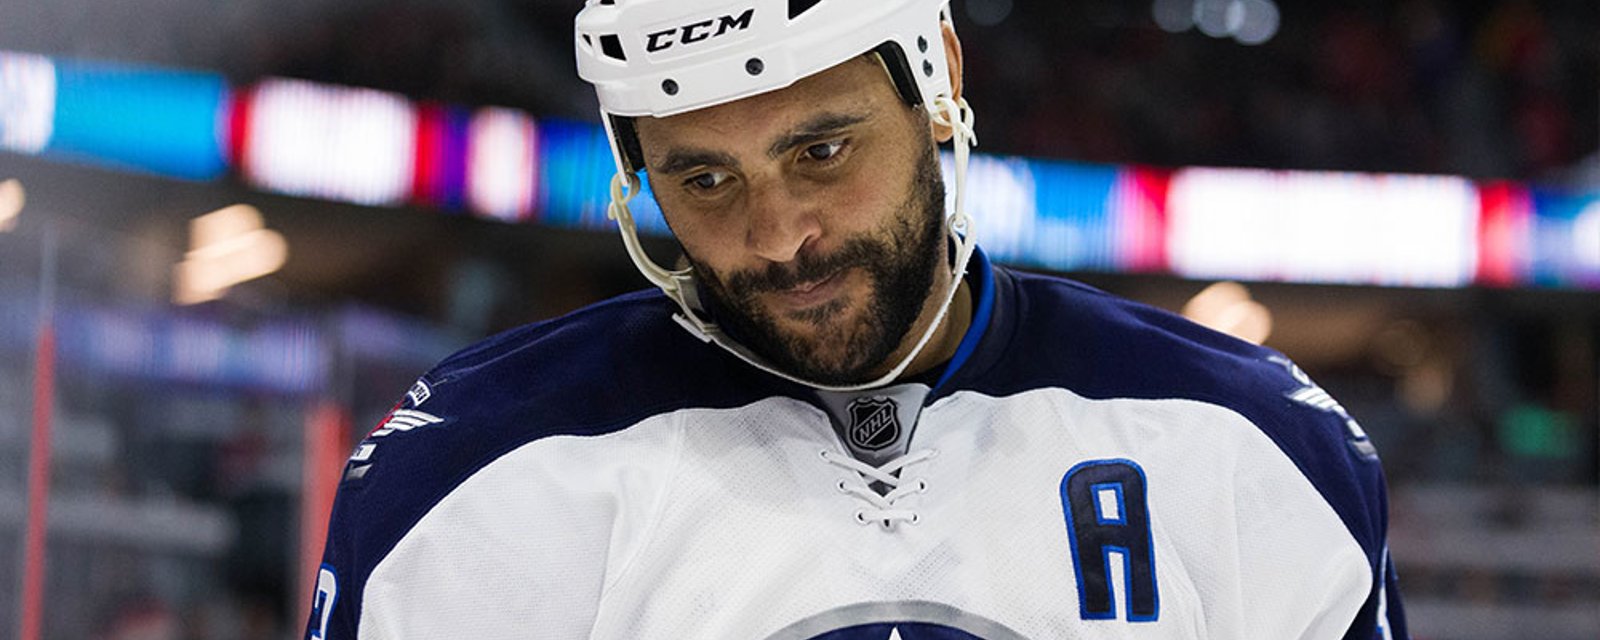 Report: It appears as if Dustin Byfuglien's time with the Jets is over